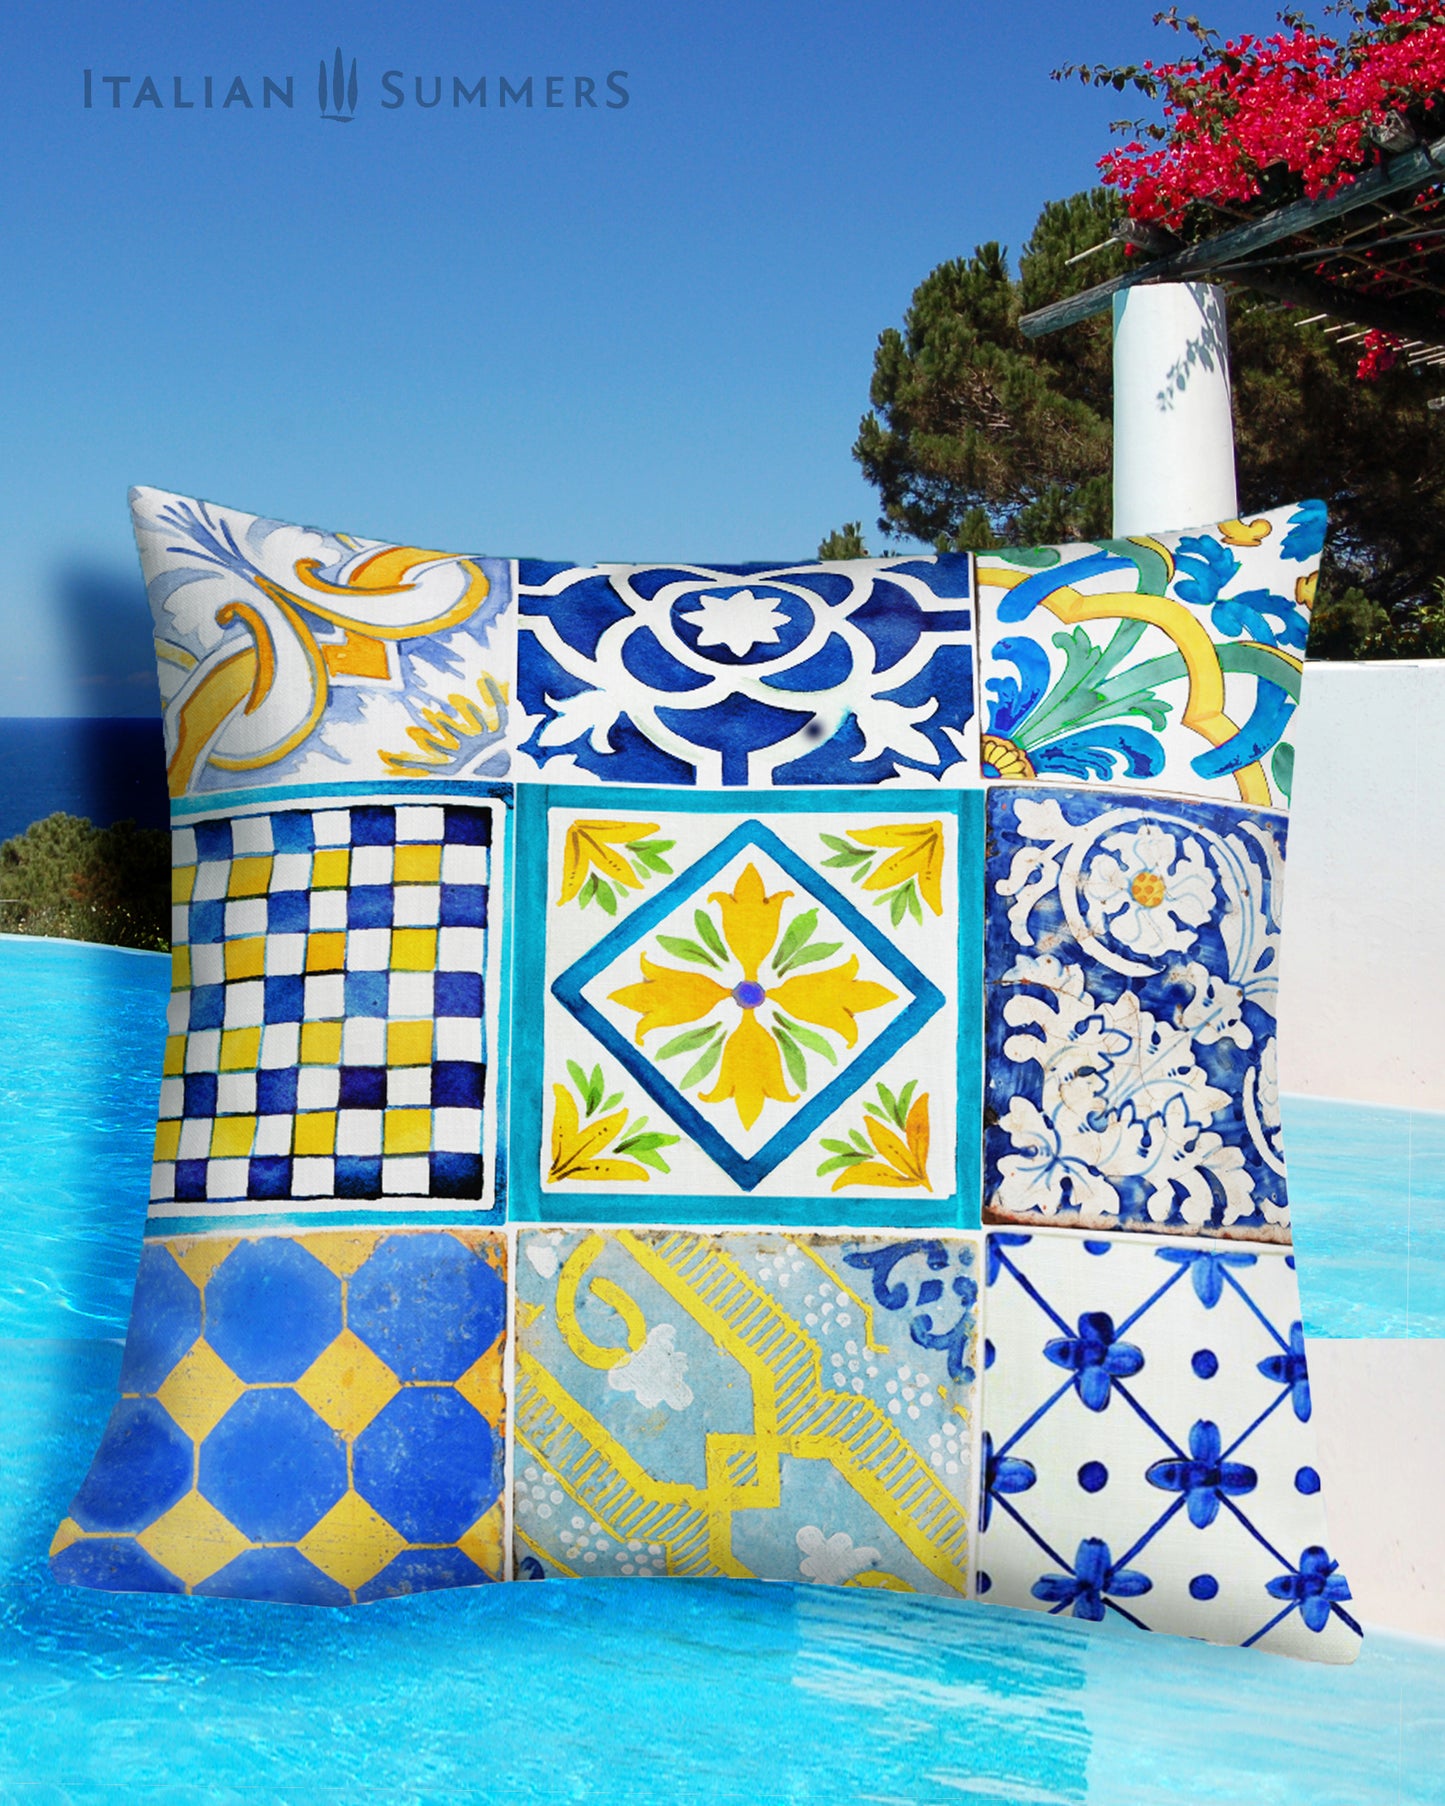 Italy inspired pillow cover with a print of 9 Italian maiolica tiles in the colors blue, white and yellow. The tile in the middle has the text 'I don't need therapy, I just need to go to Italy". Printed on 2 sides. Made by Italian Summers